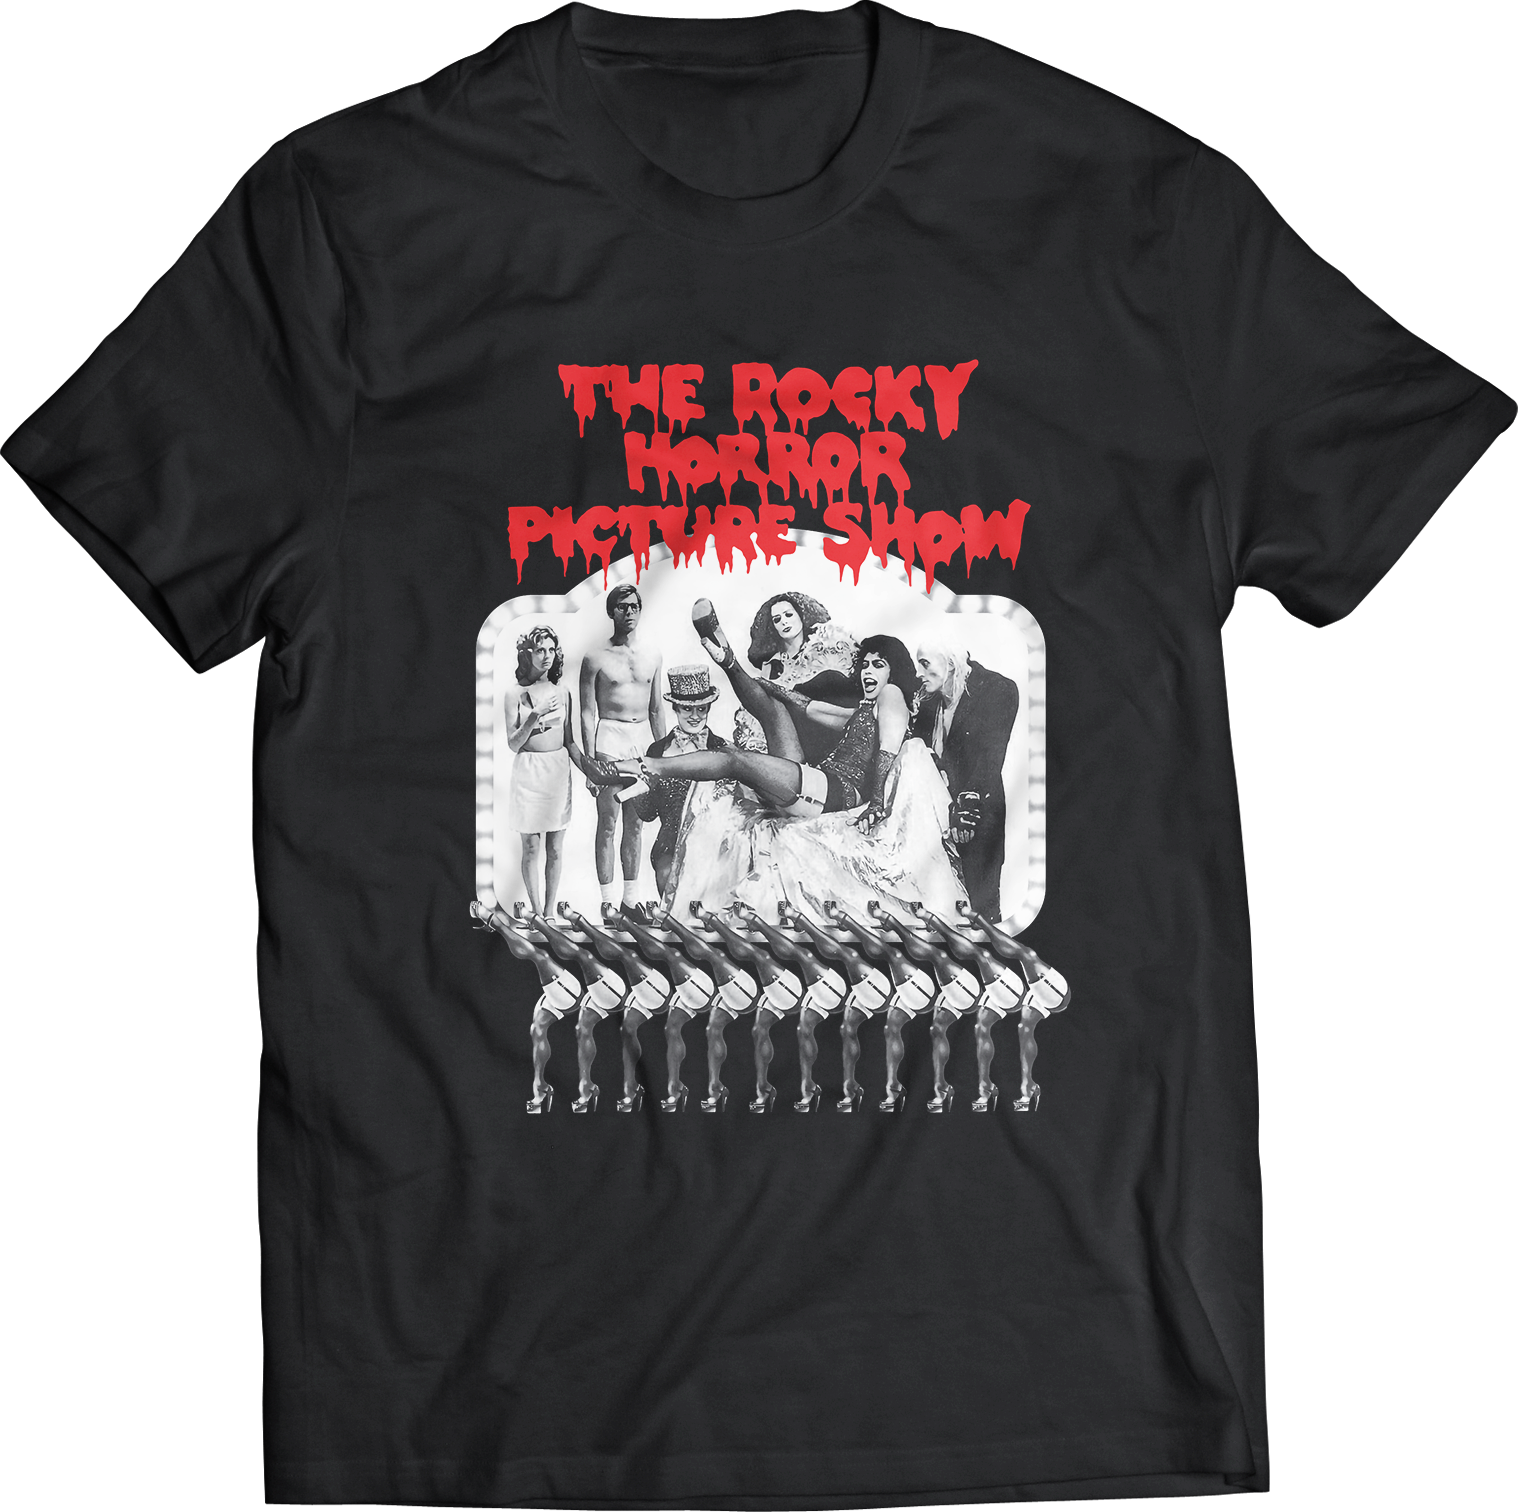 ROCKY HORROR PICTURE SHOW LIMITED EDITION "CAST" GLOW IN THE DARK BLACK T-SHIRT